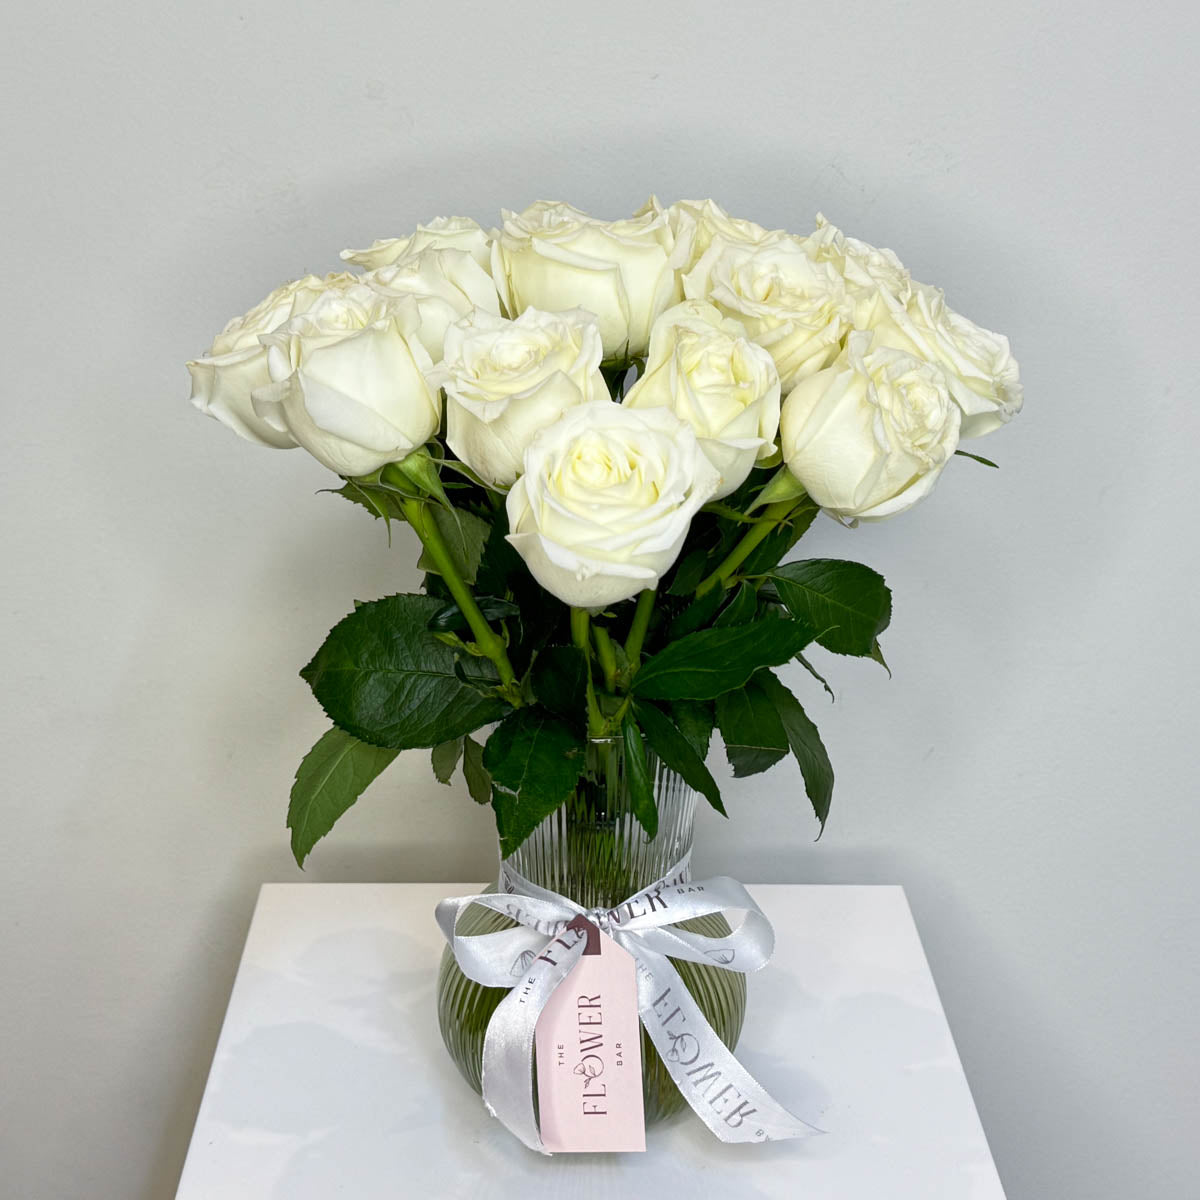 Glass Vase with White Roses